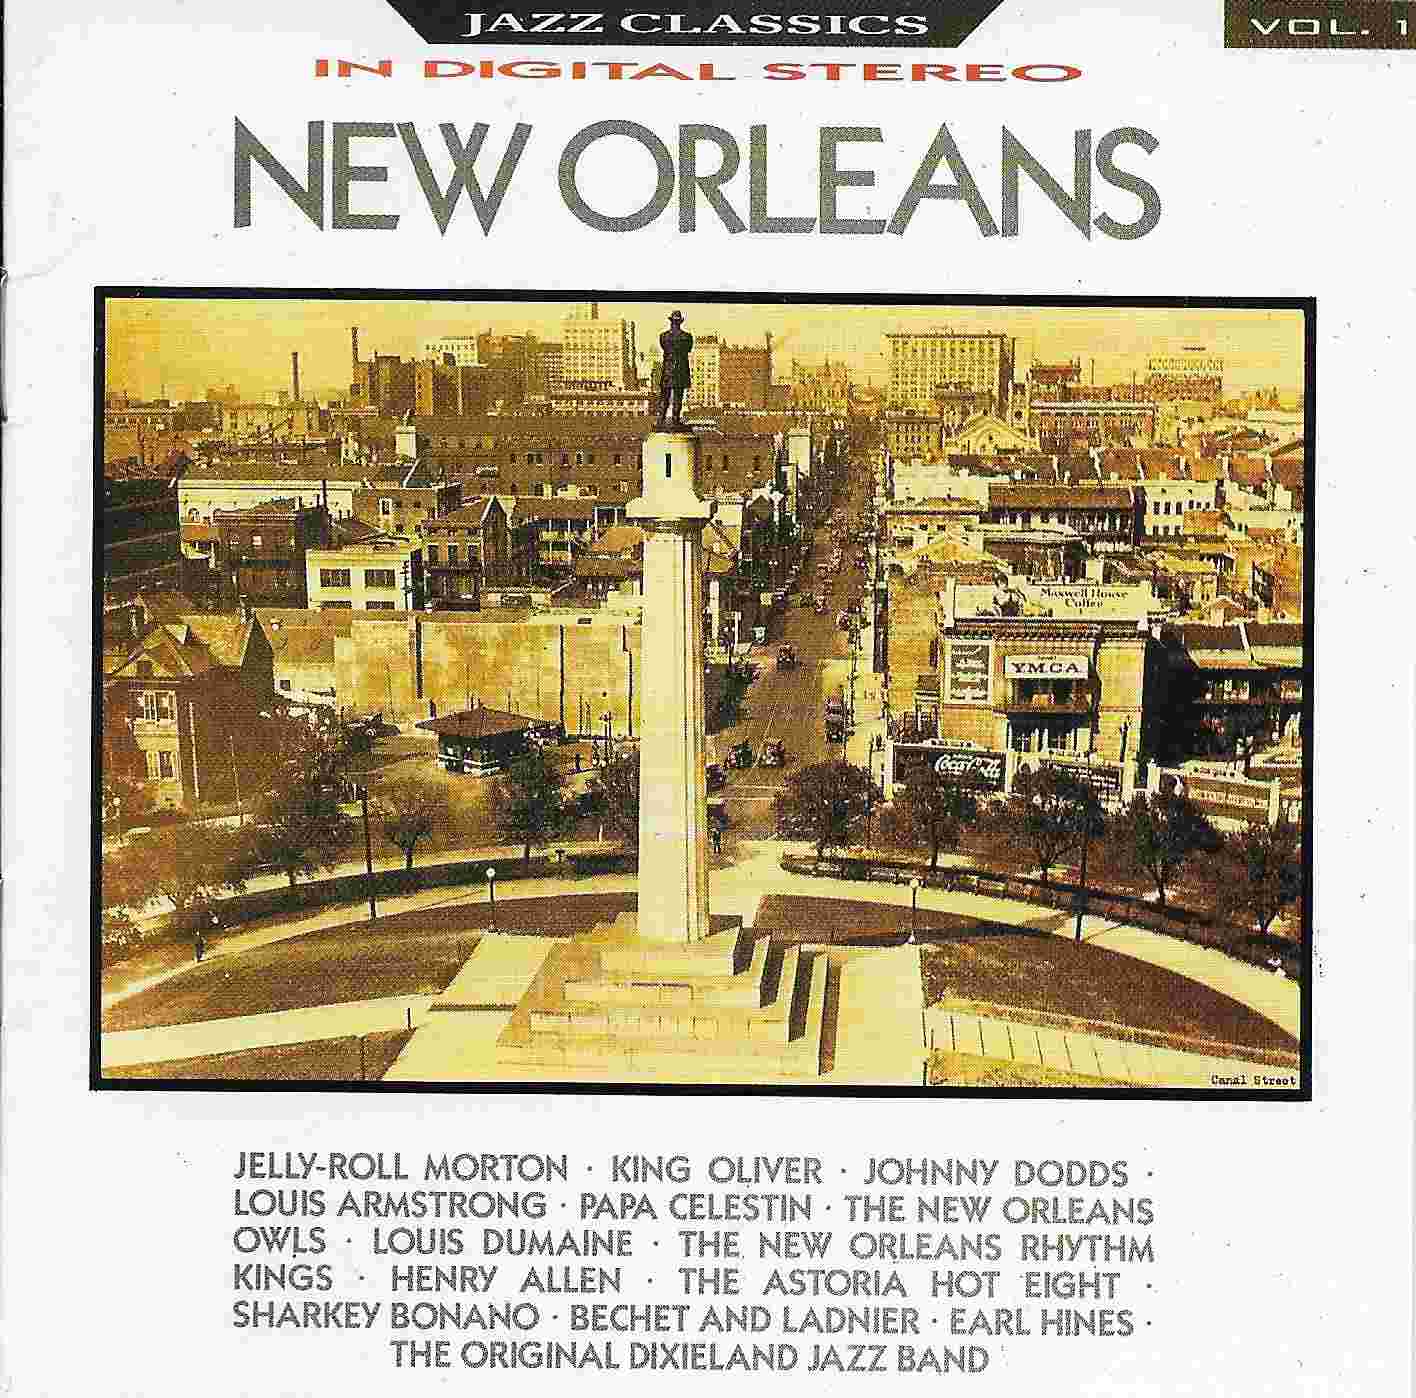 Picture of Jazz Classics - Volume 1, New Orleans by artist Various from the BBC cds - Records and Tapes library